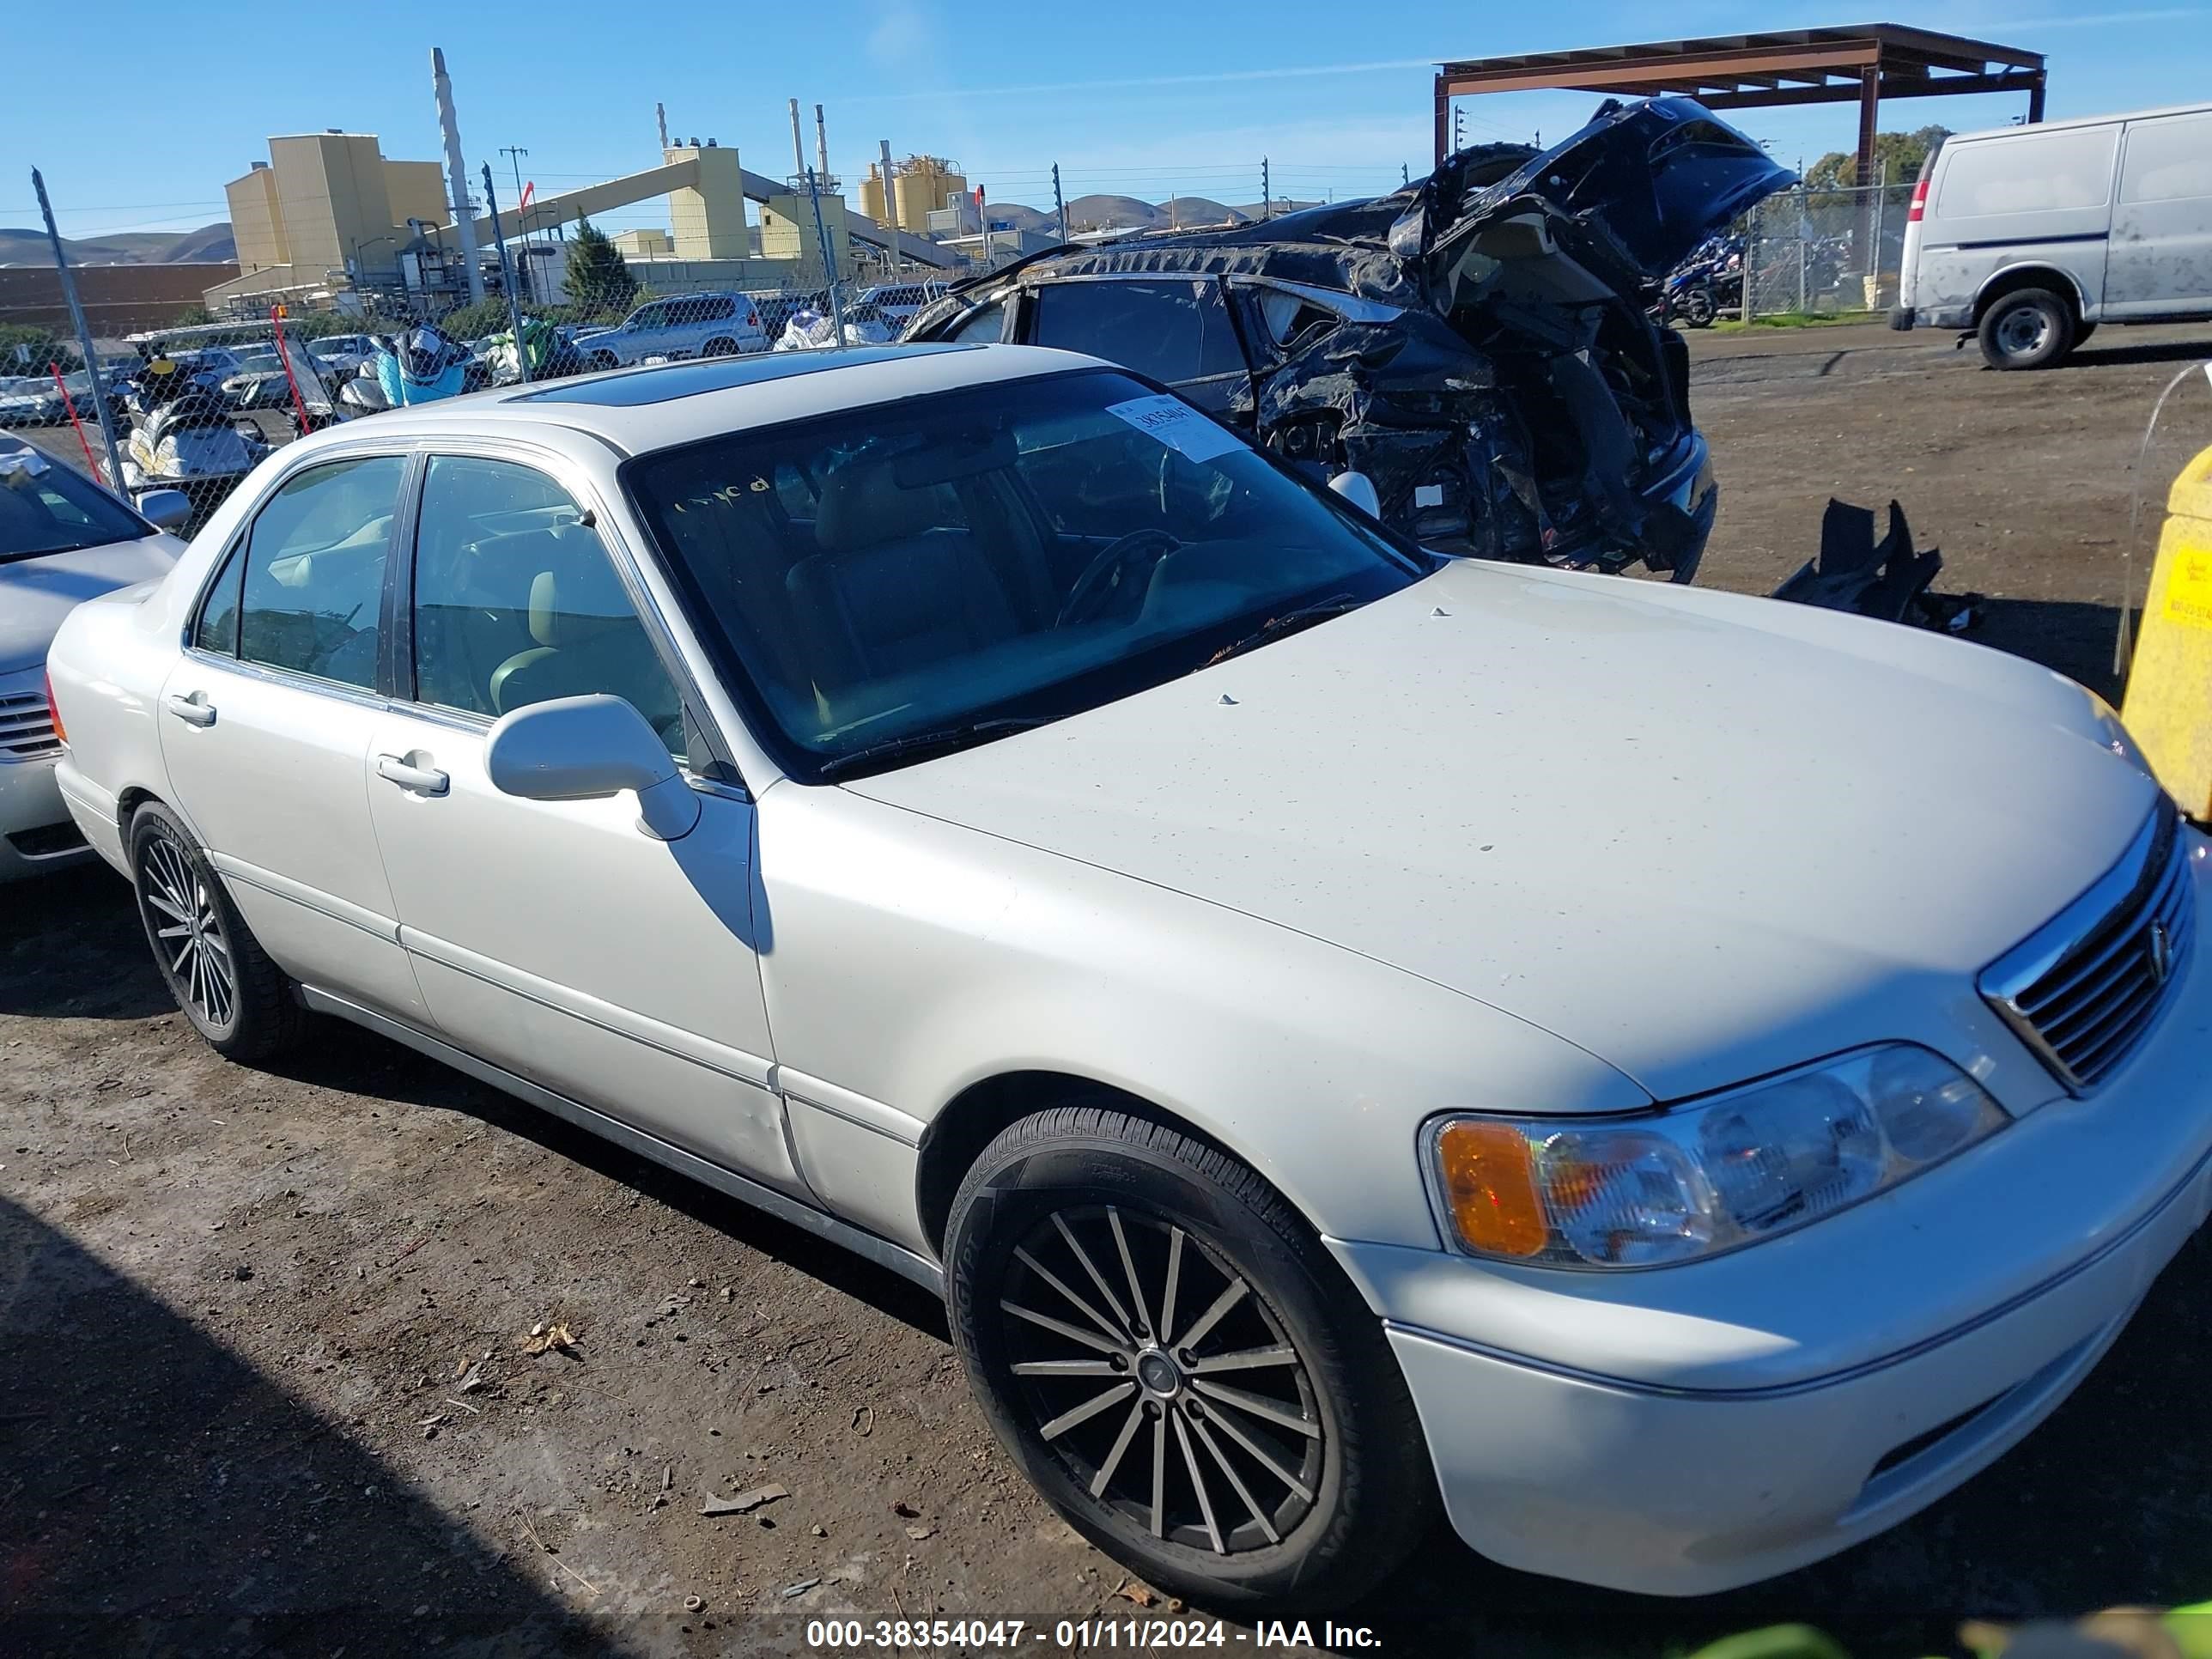 vin: JH4KA9643WC003811 JH4KA9643WC003811 1998 acura rl 3500 for Sale in 94565, 2780 Willow Pass Road, Bay Point, California, USA